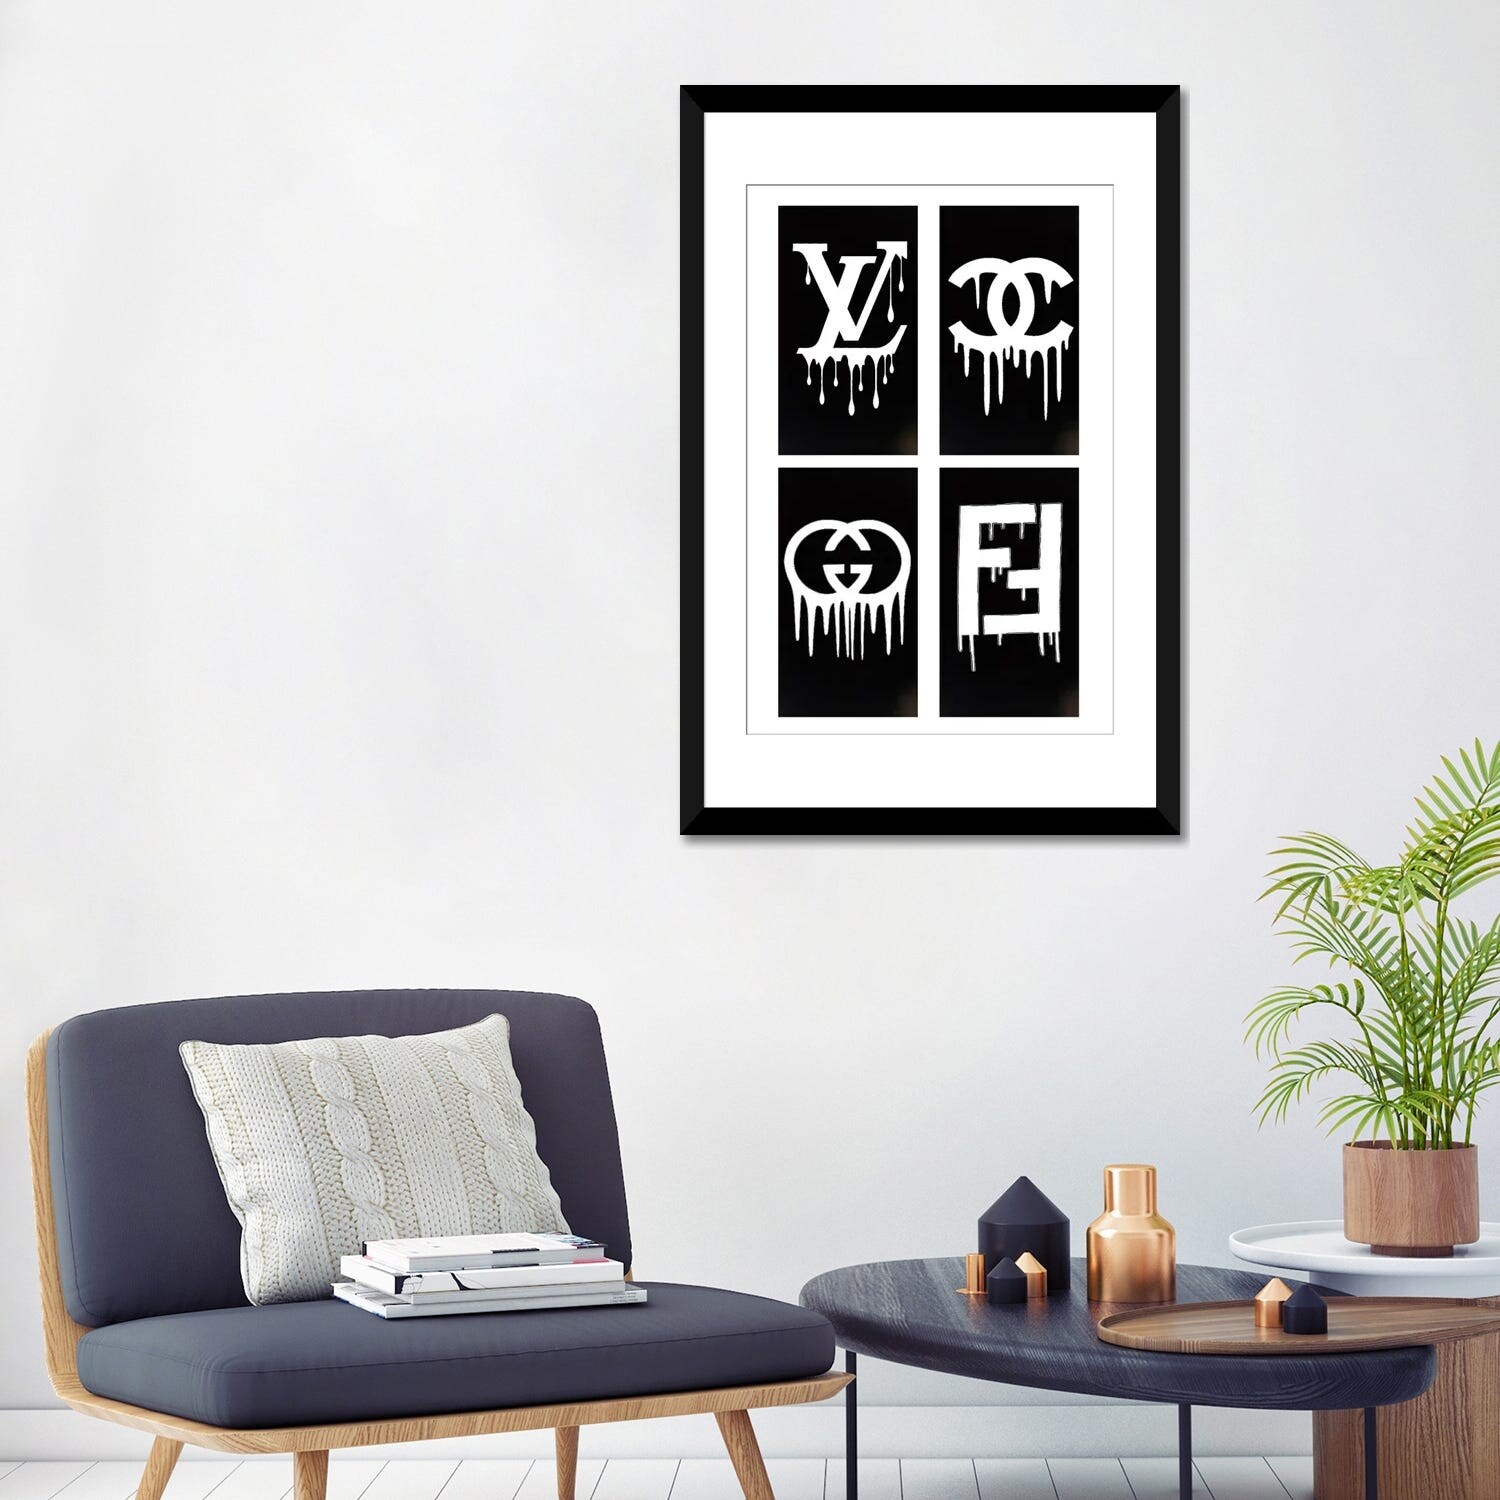 Framed Poster Prints - Chanel and More Dripping Logo with Border by Julie Schreiber ( Fashion > Fashion Brands > Louis Vuitton art) - 32x24x1